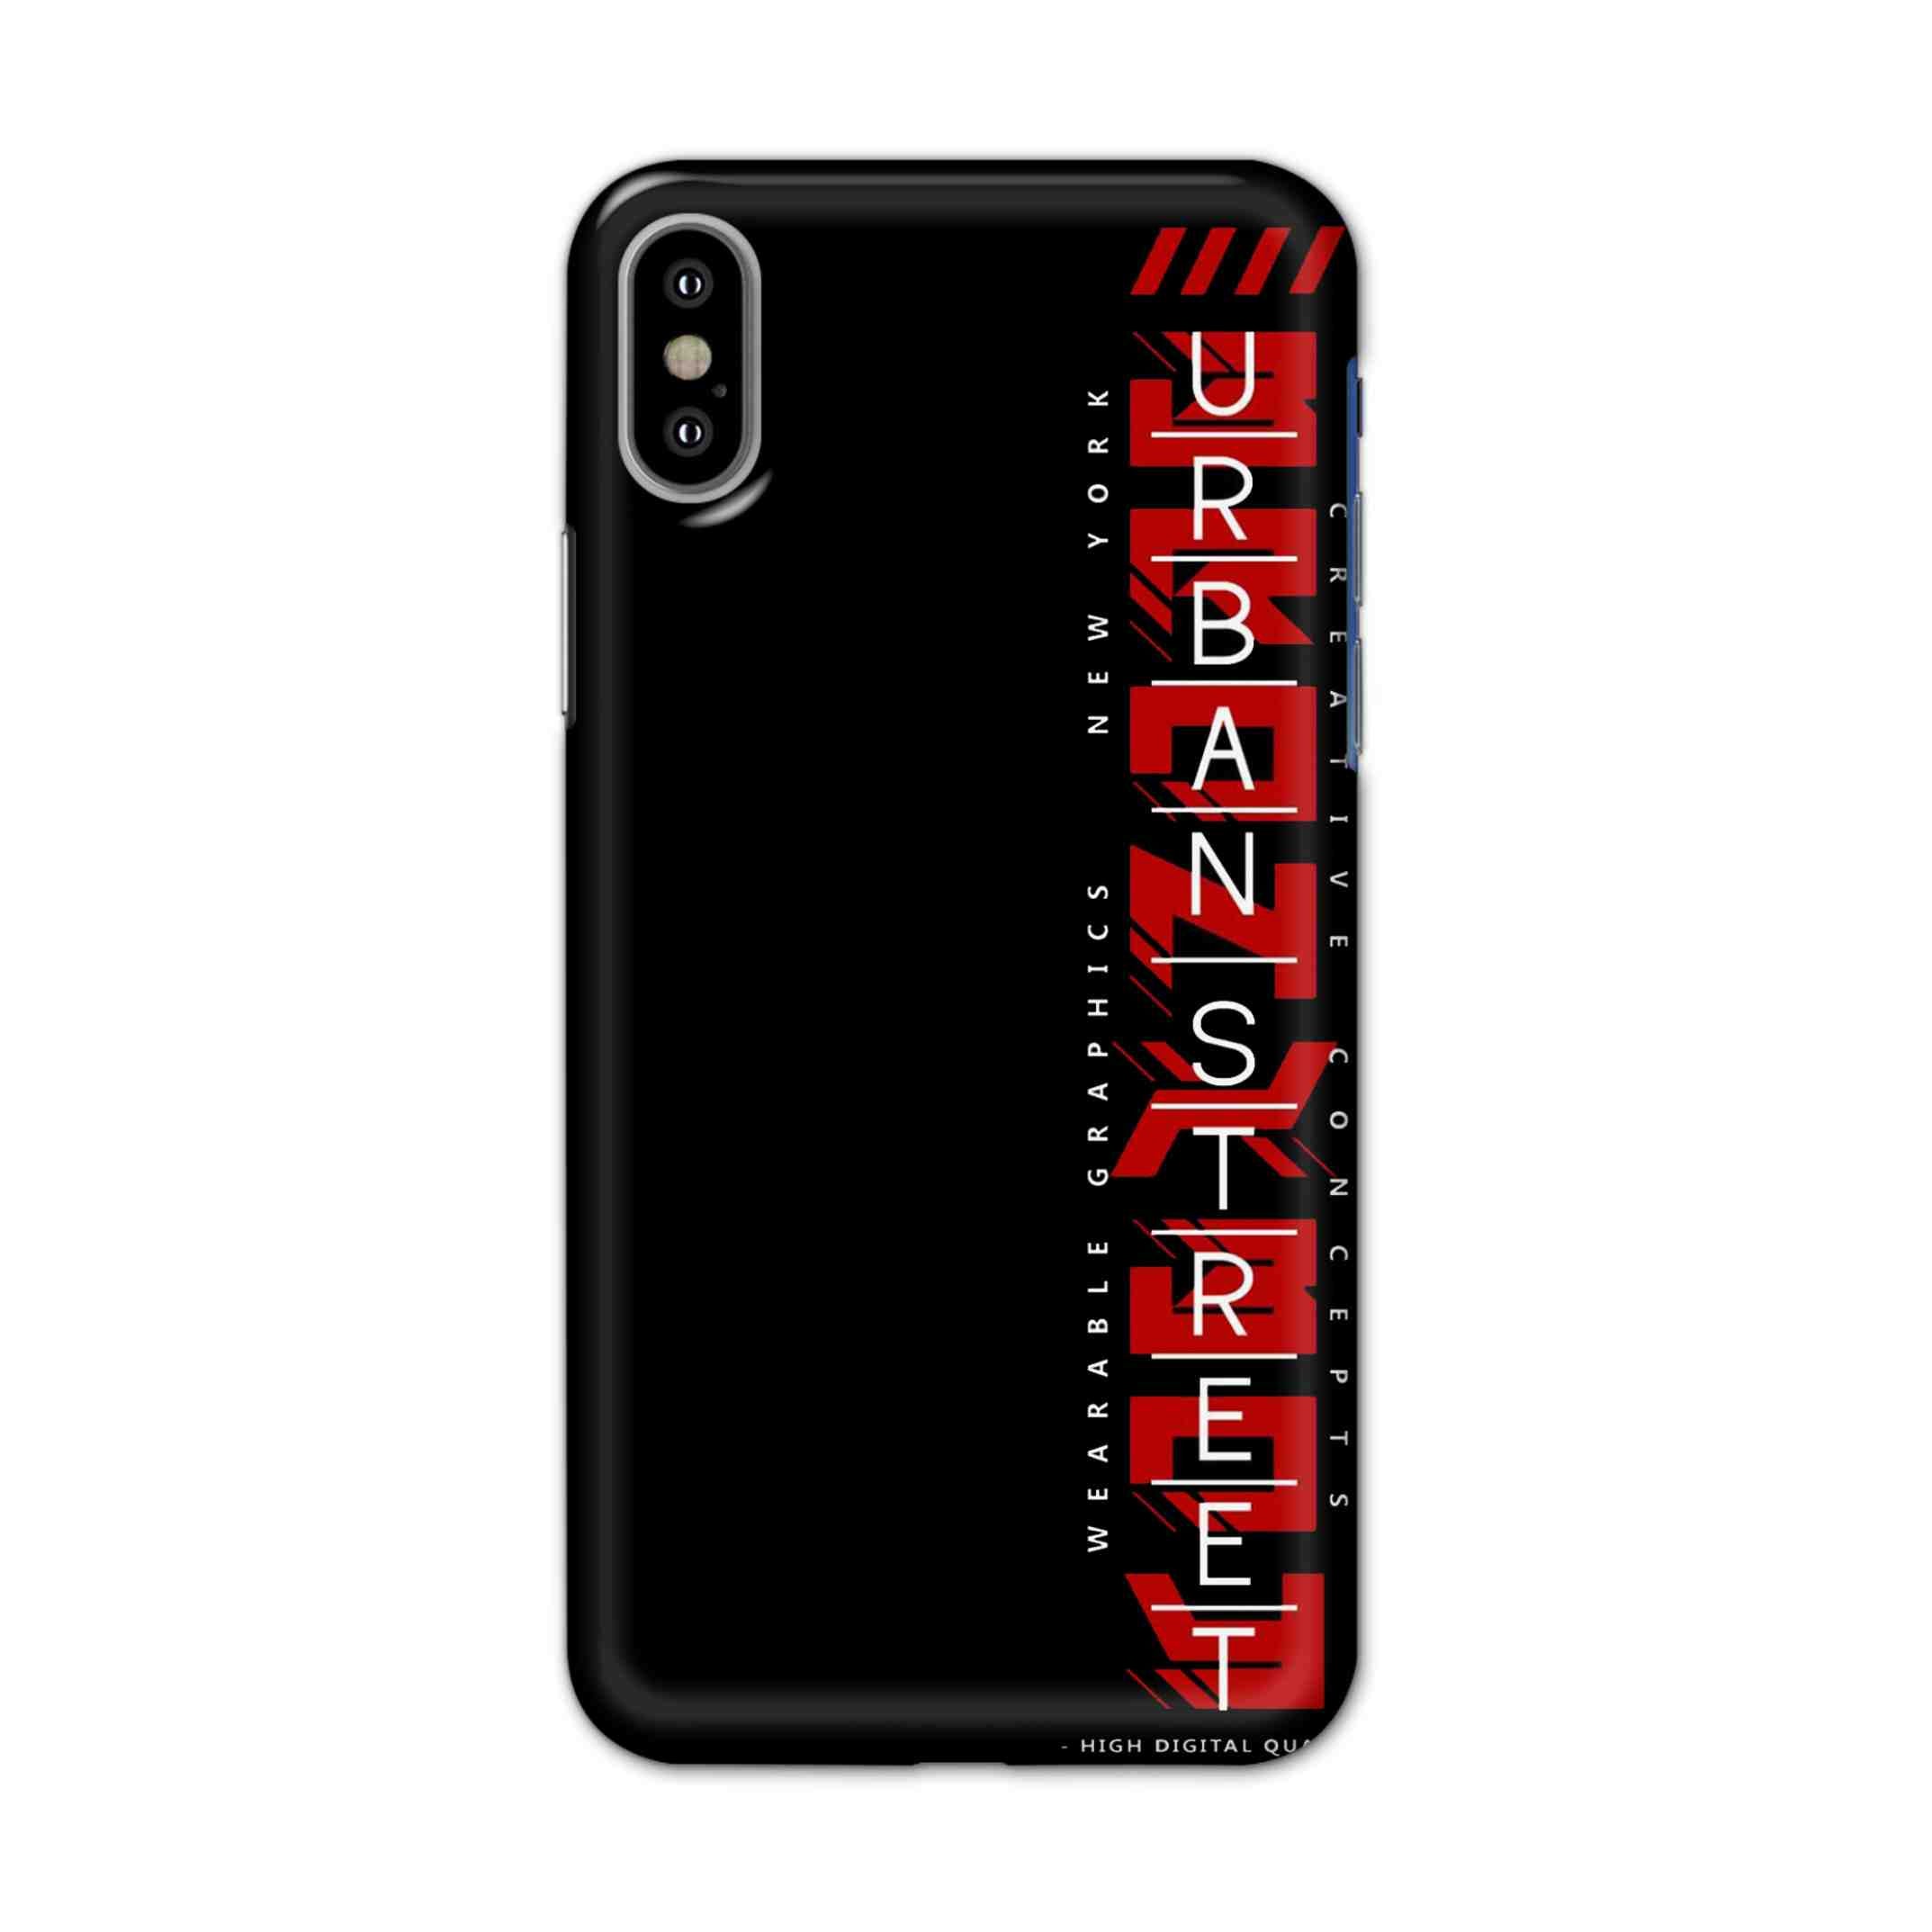 Buy Urban Street Hard Back Mobile Phone Case/Cover For iPhone X Online